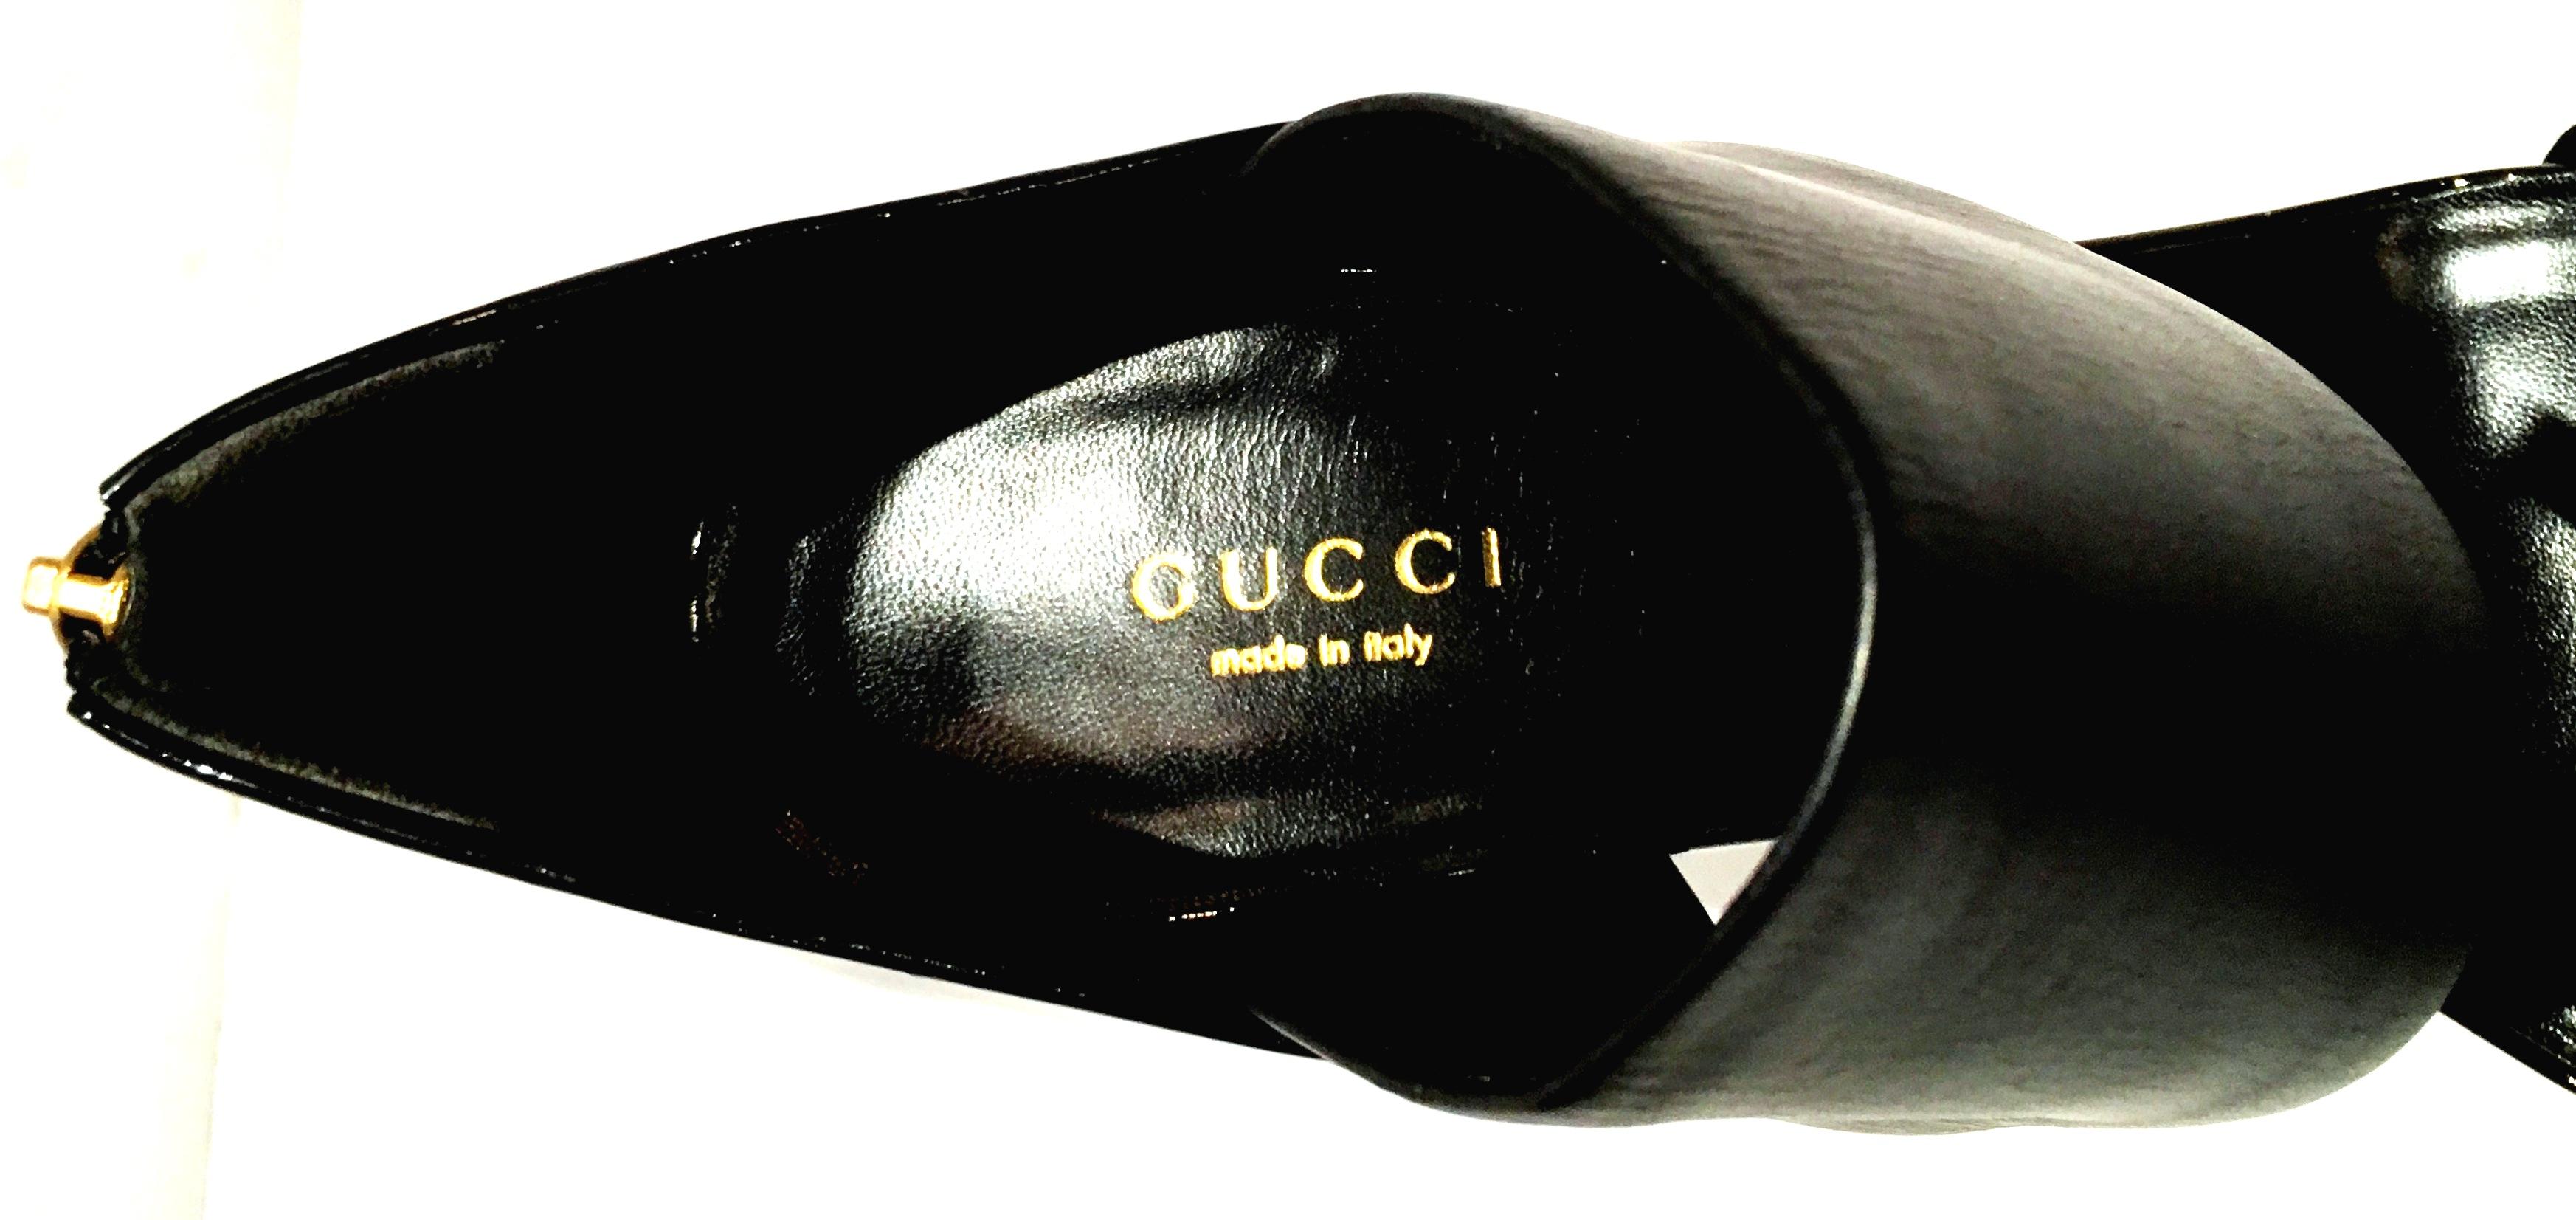 21st Century & New Italian Leather Platform Sandals By, Gucci 10